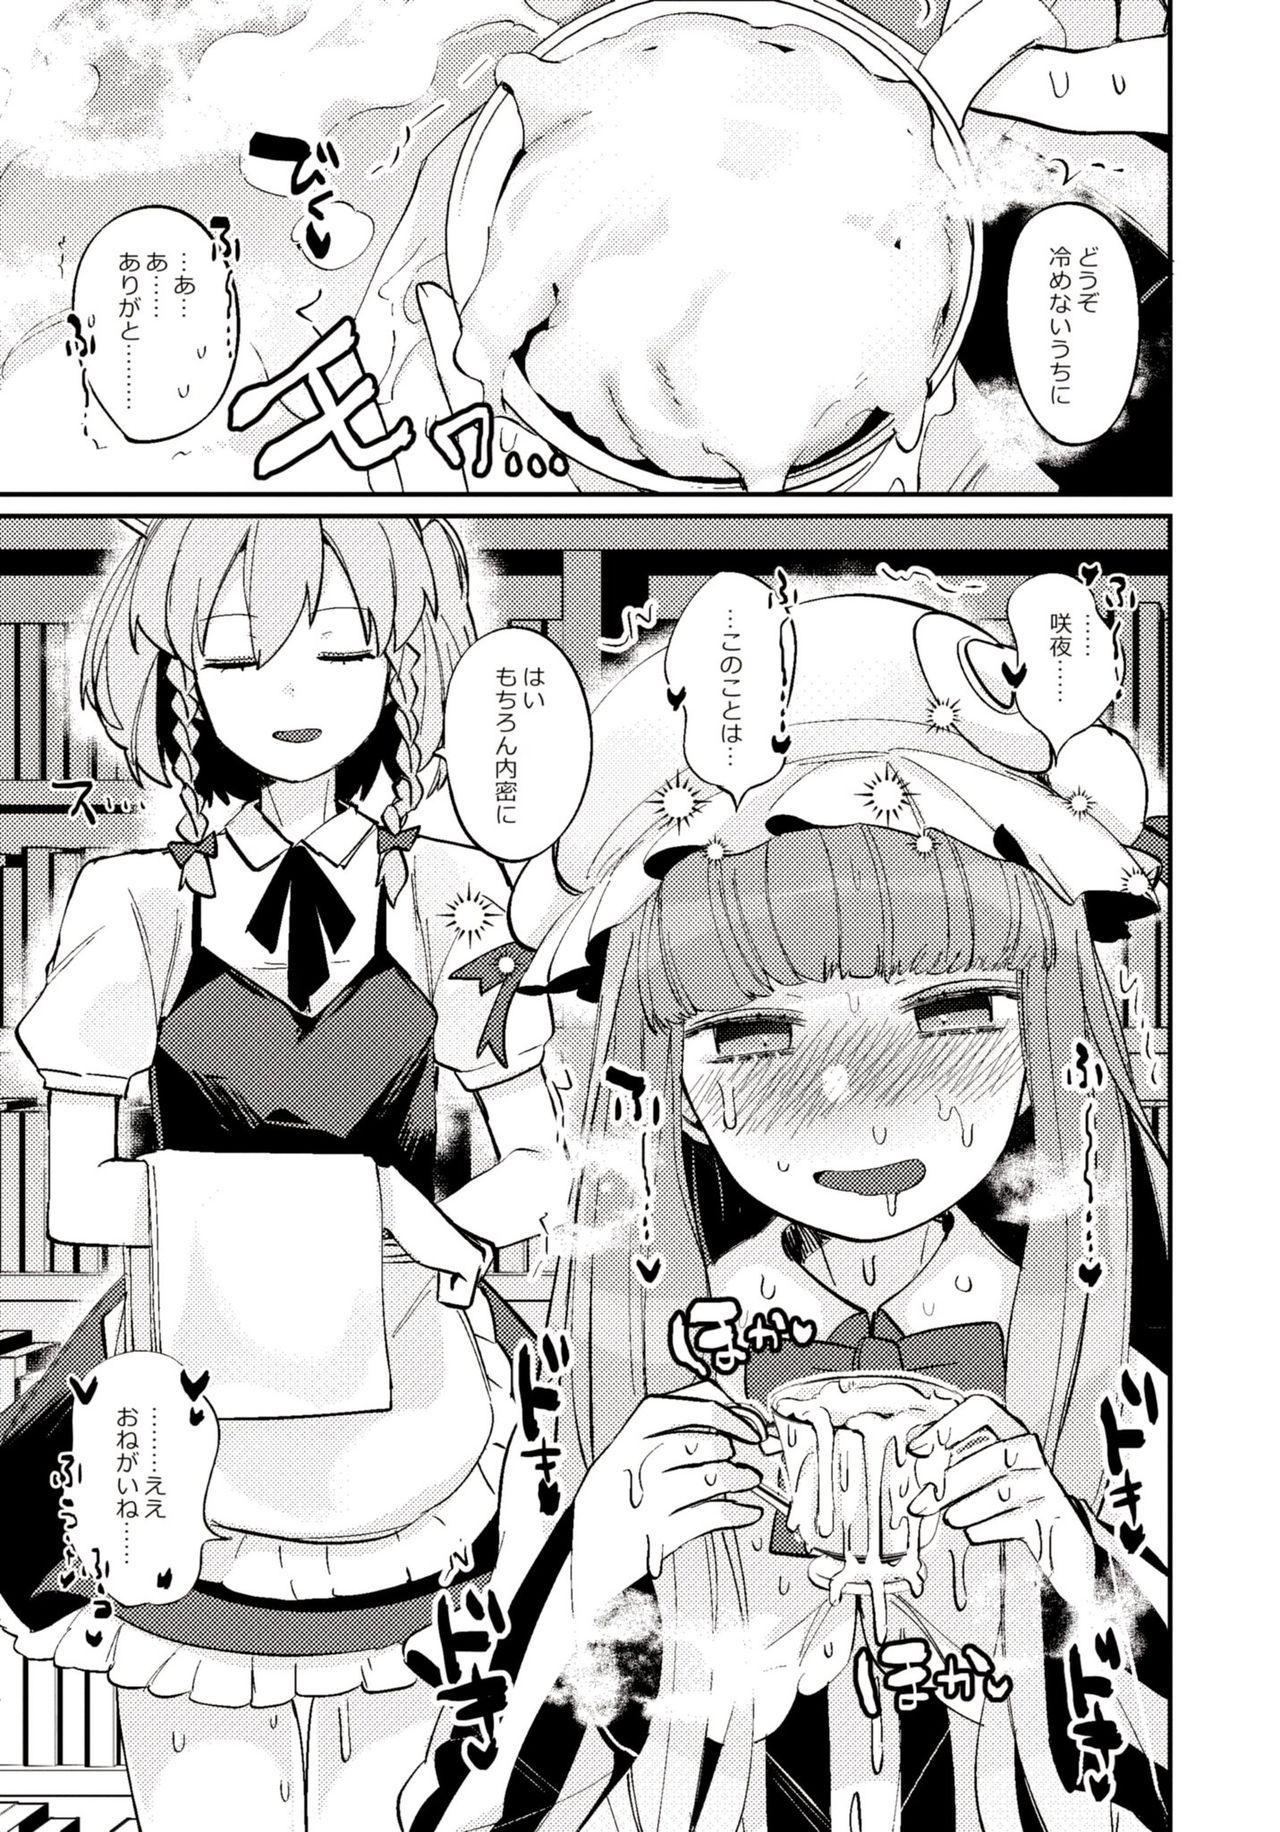 Slapping メス男子匕首さんと書籍くんです！ - Touhou project Phat Ass - Page 4